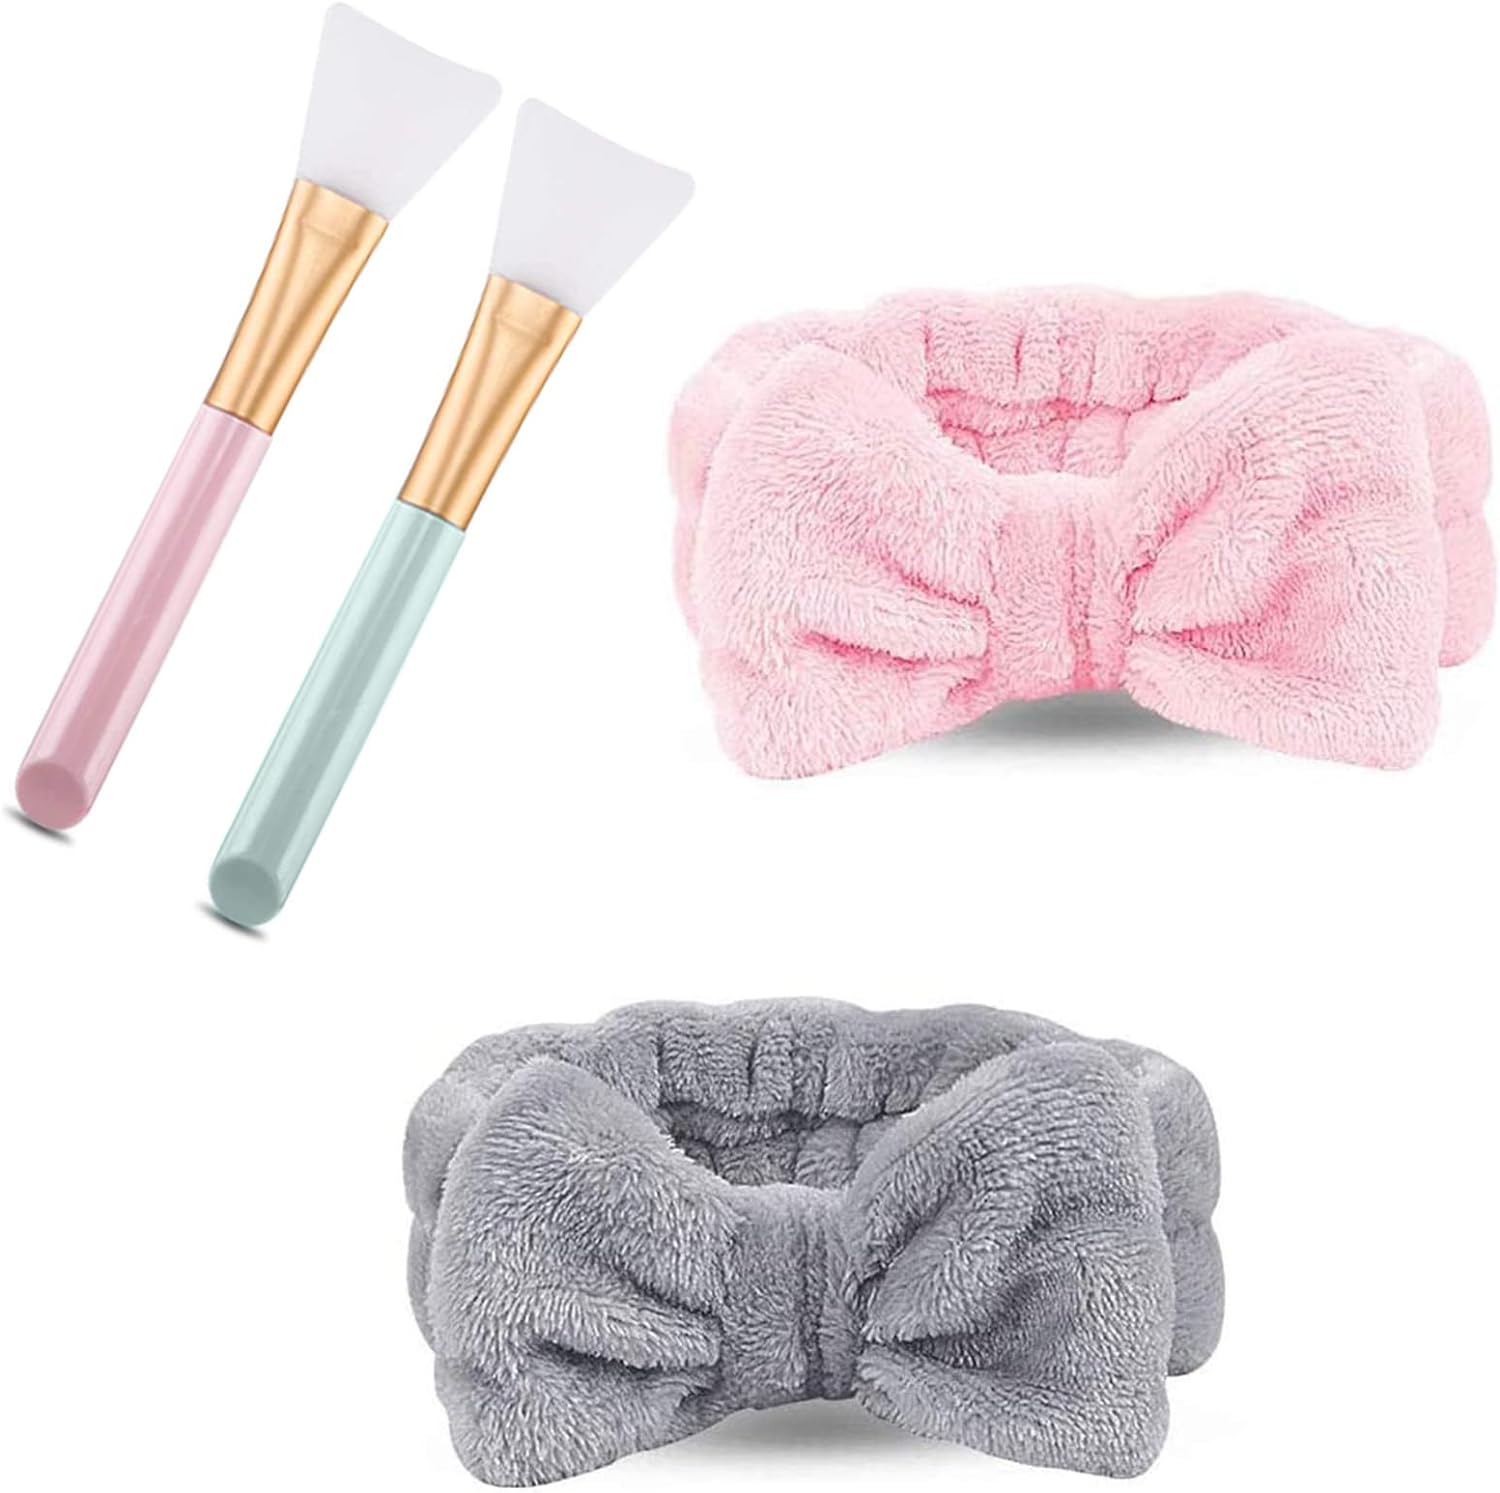 Spa Headband,2 Pack Bowknot Hair Bands With 2 Silicone Face Mask Brush,Makeup Headbands,for Women Girls Washing Face Shower Sports Beauty Skincare(Gray,Pink)